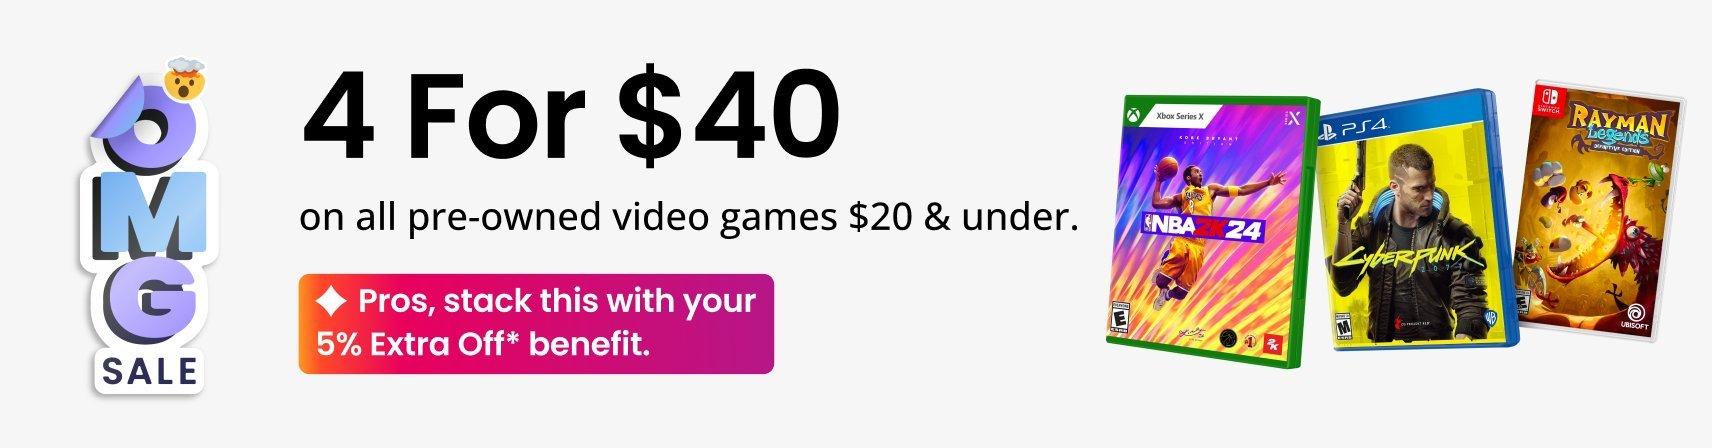 4 for $40 Pre-Owned Games Under $20